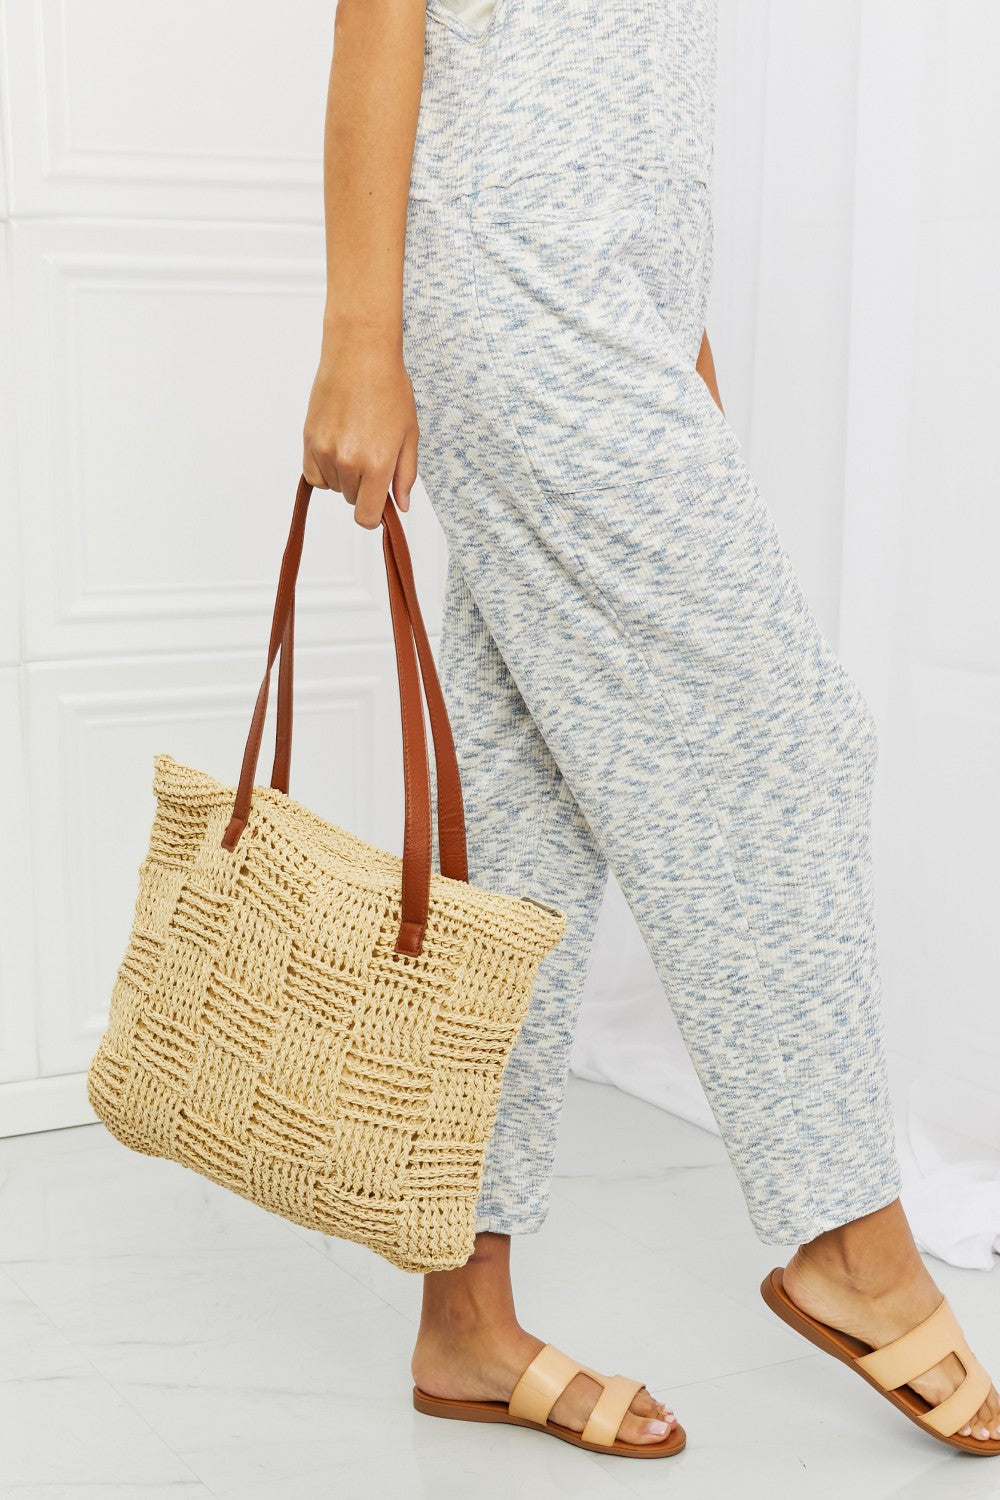 Light Gray Fame Picnic Date Straw Tote Bag Sentient Beauty Fashions Bag